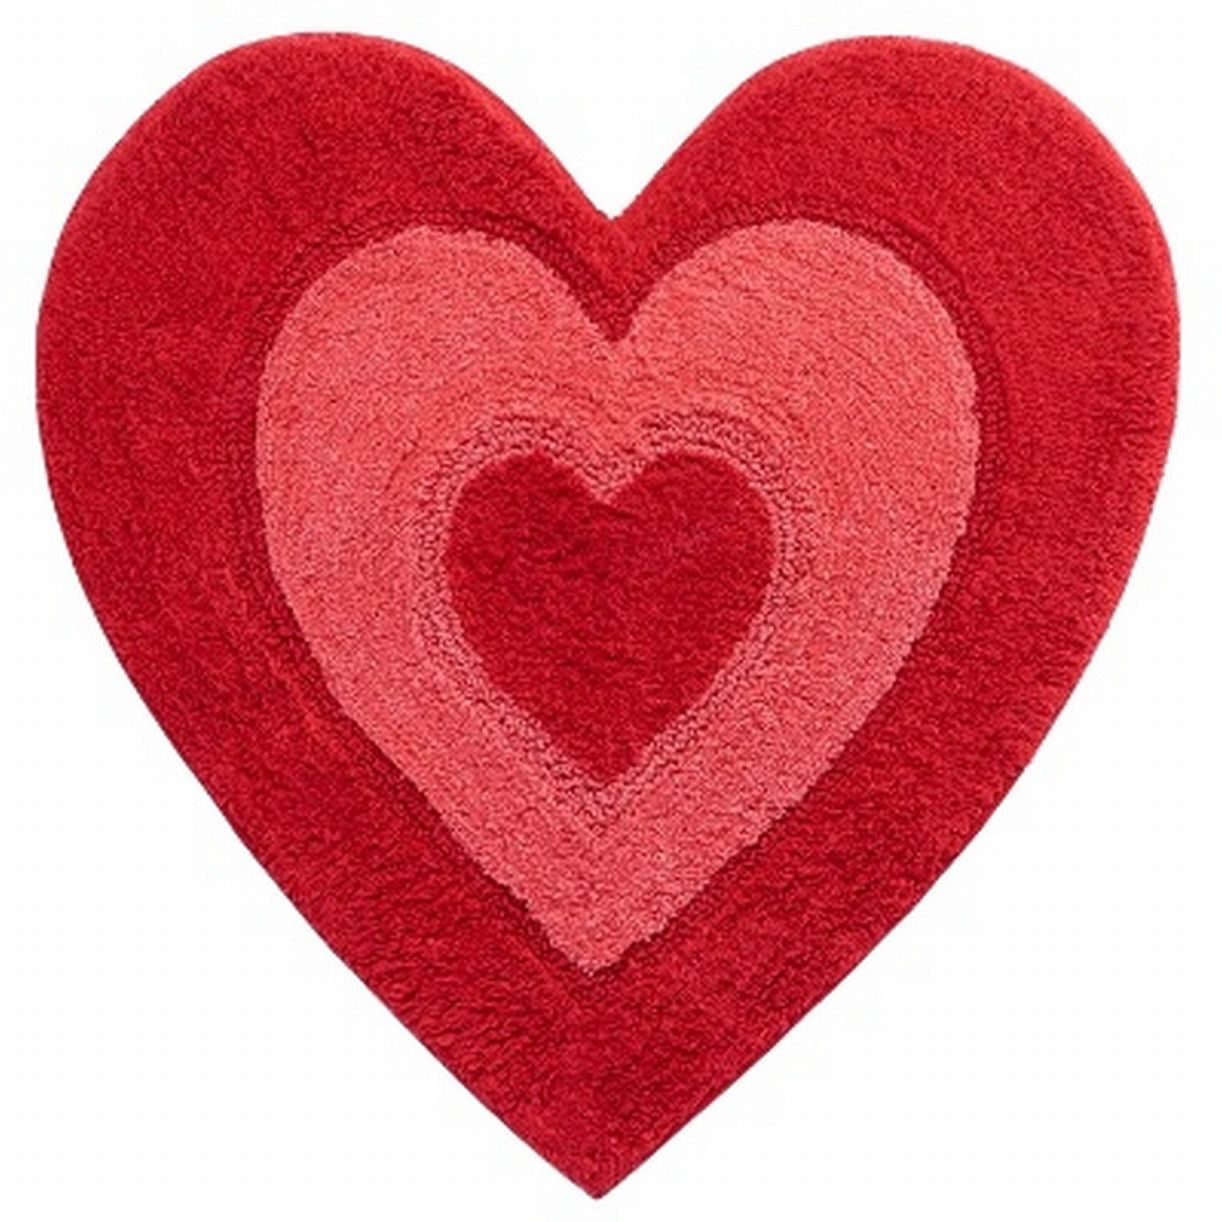 ALAZA Love Red Heart Valentine's Day Area Rug Rugs Non-Slip Floor Mat Doormats Living Dining Room Bedroom Dorm 31 x 20 inches Home Decor 